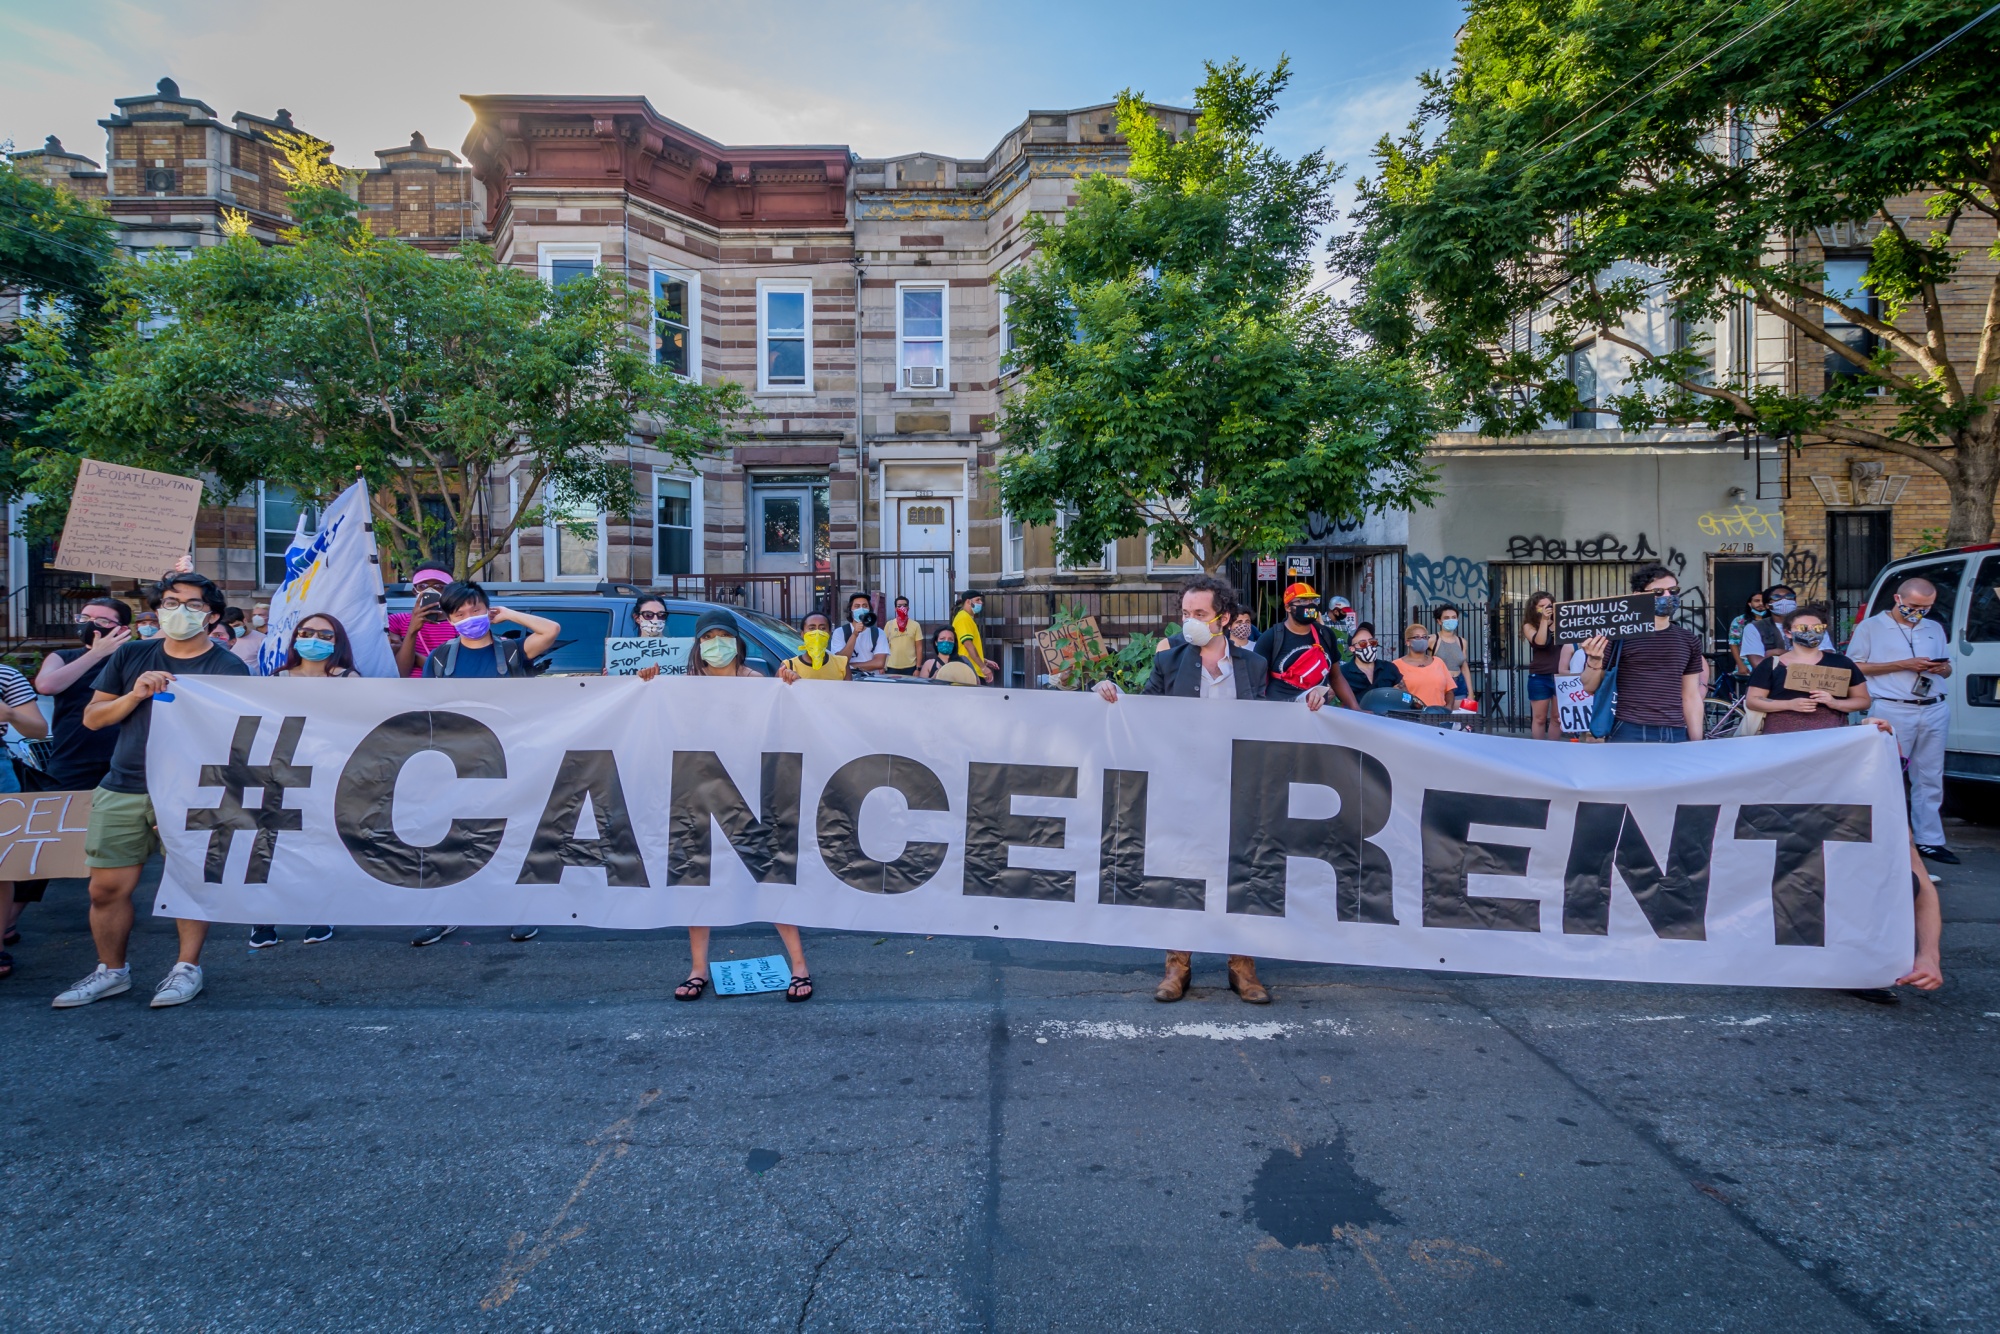 Among the demands of protesters has been suspension&nbsp;of rent during the pandemic. While some cities and states still have moratoria in place, the federal moratorium expired July 31, leaving millions of renters vulnerable to eviction.&nbsp;